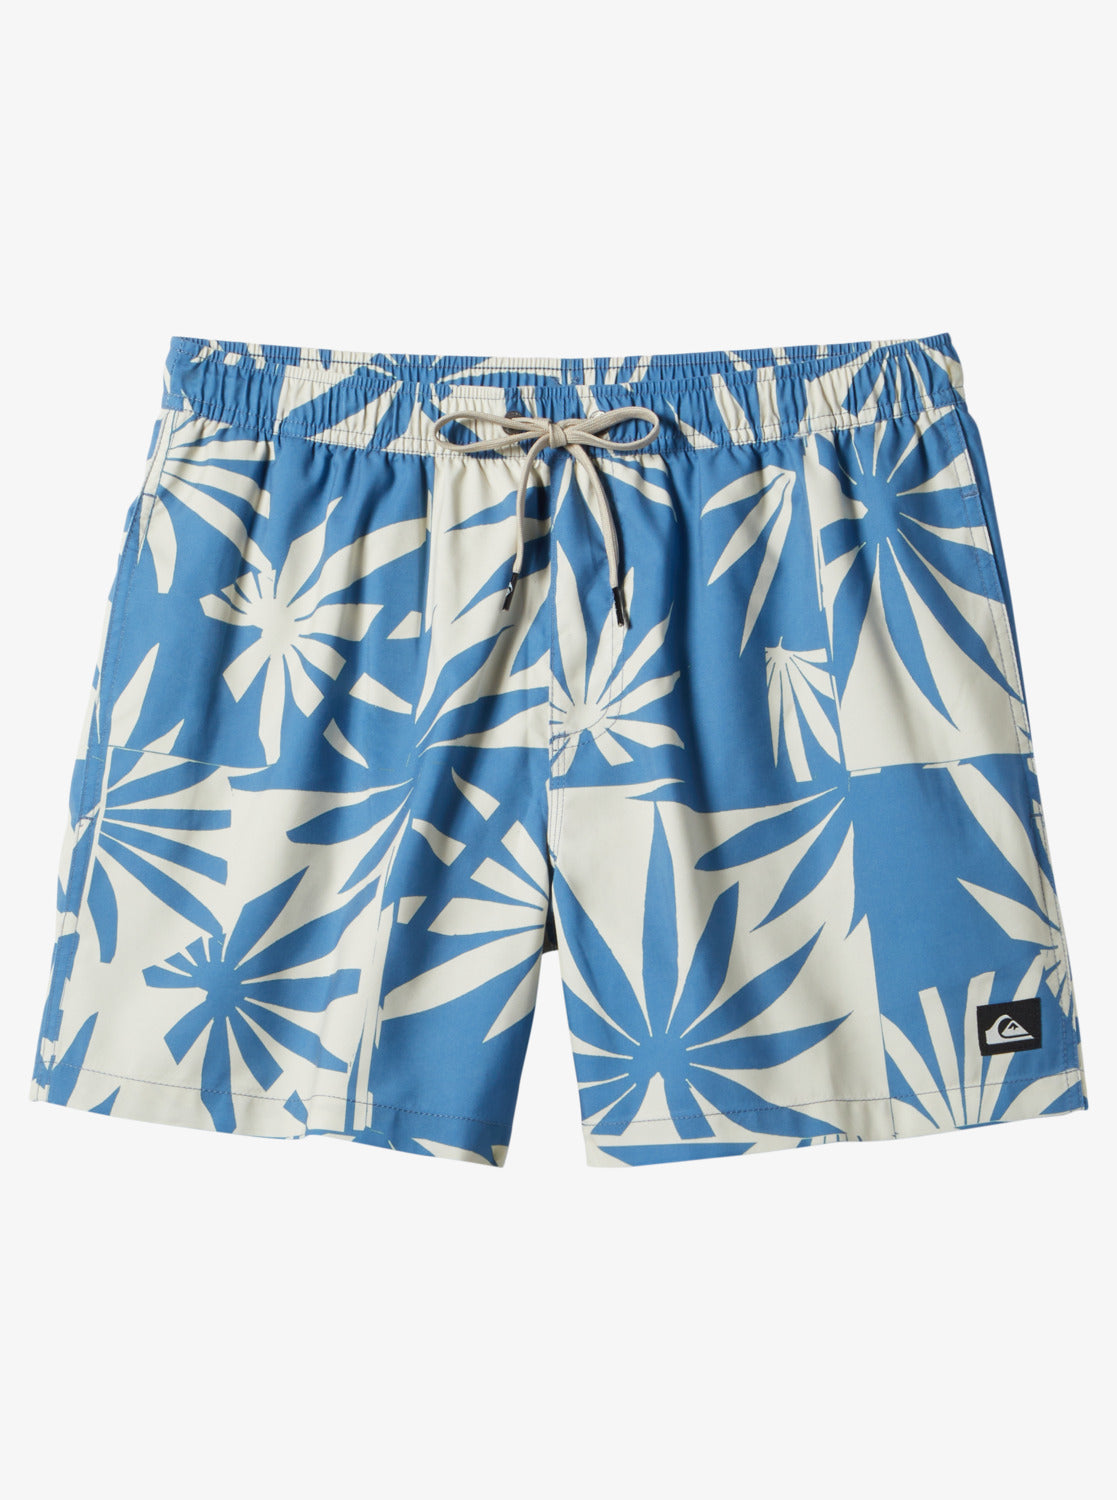 Quiksilver Everyday Mix Volley 15" Swim Shorts in Star Sapphire